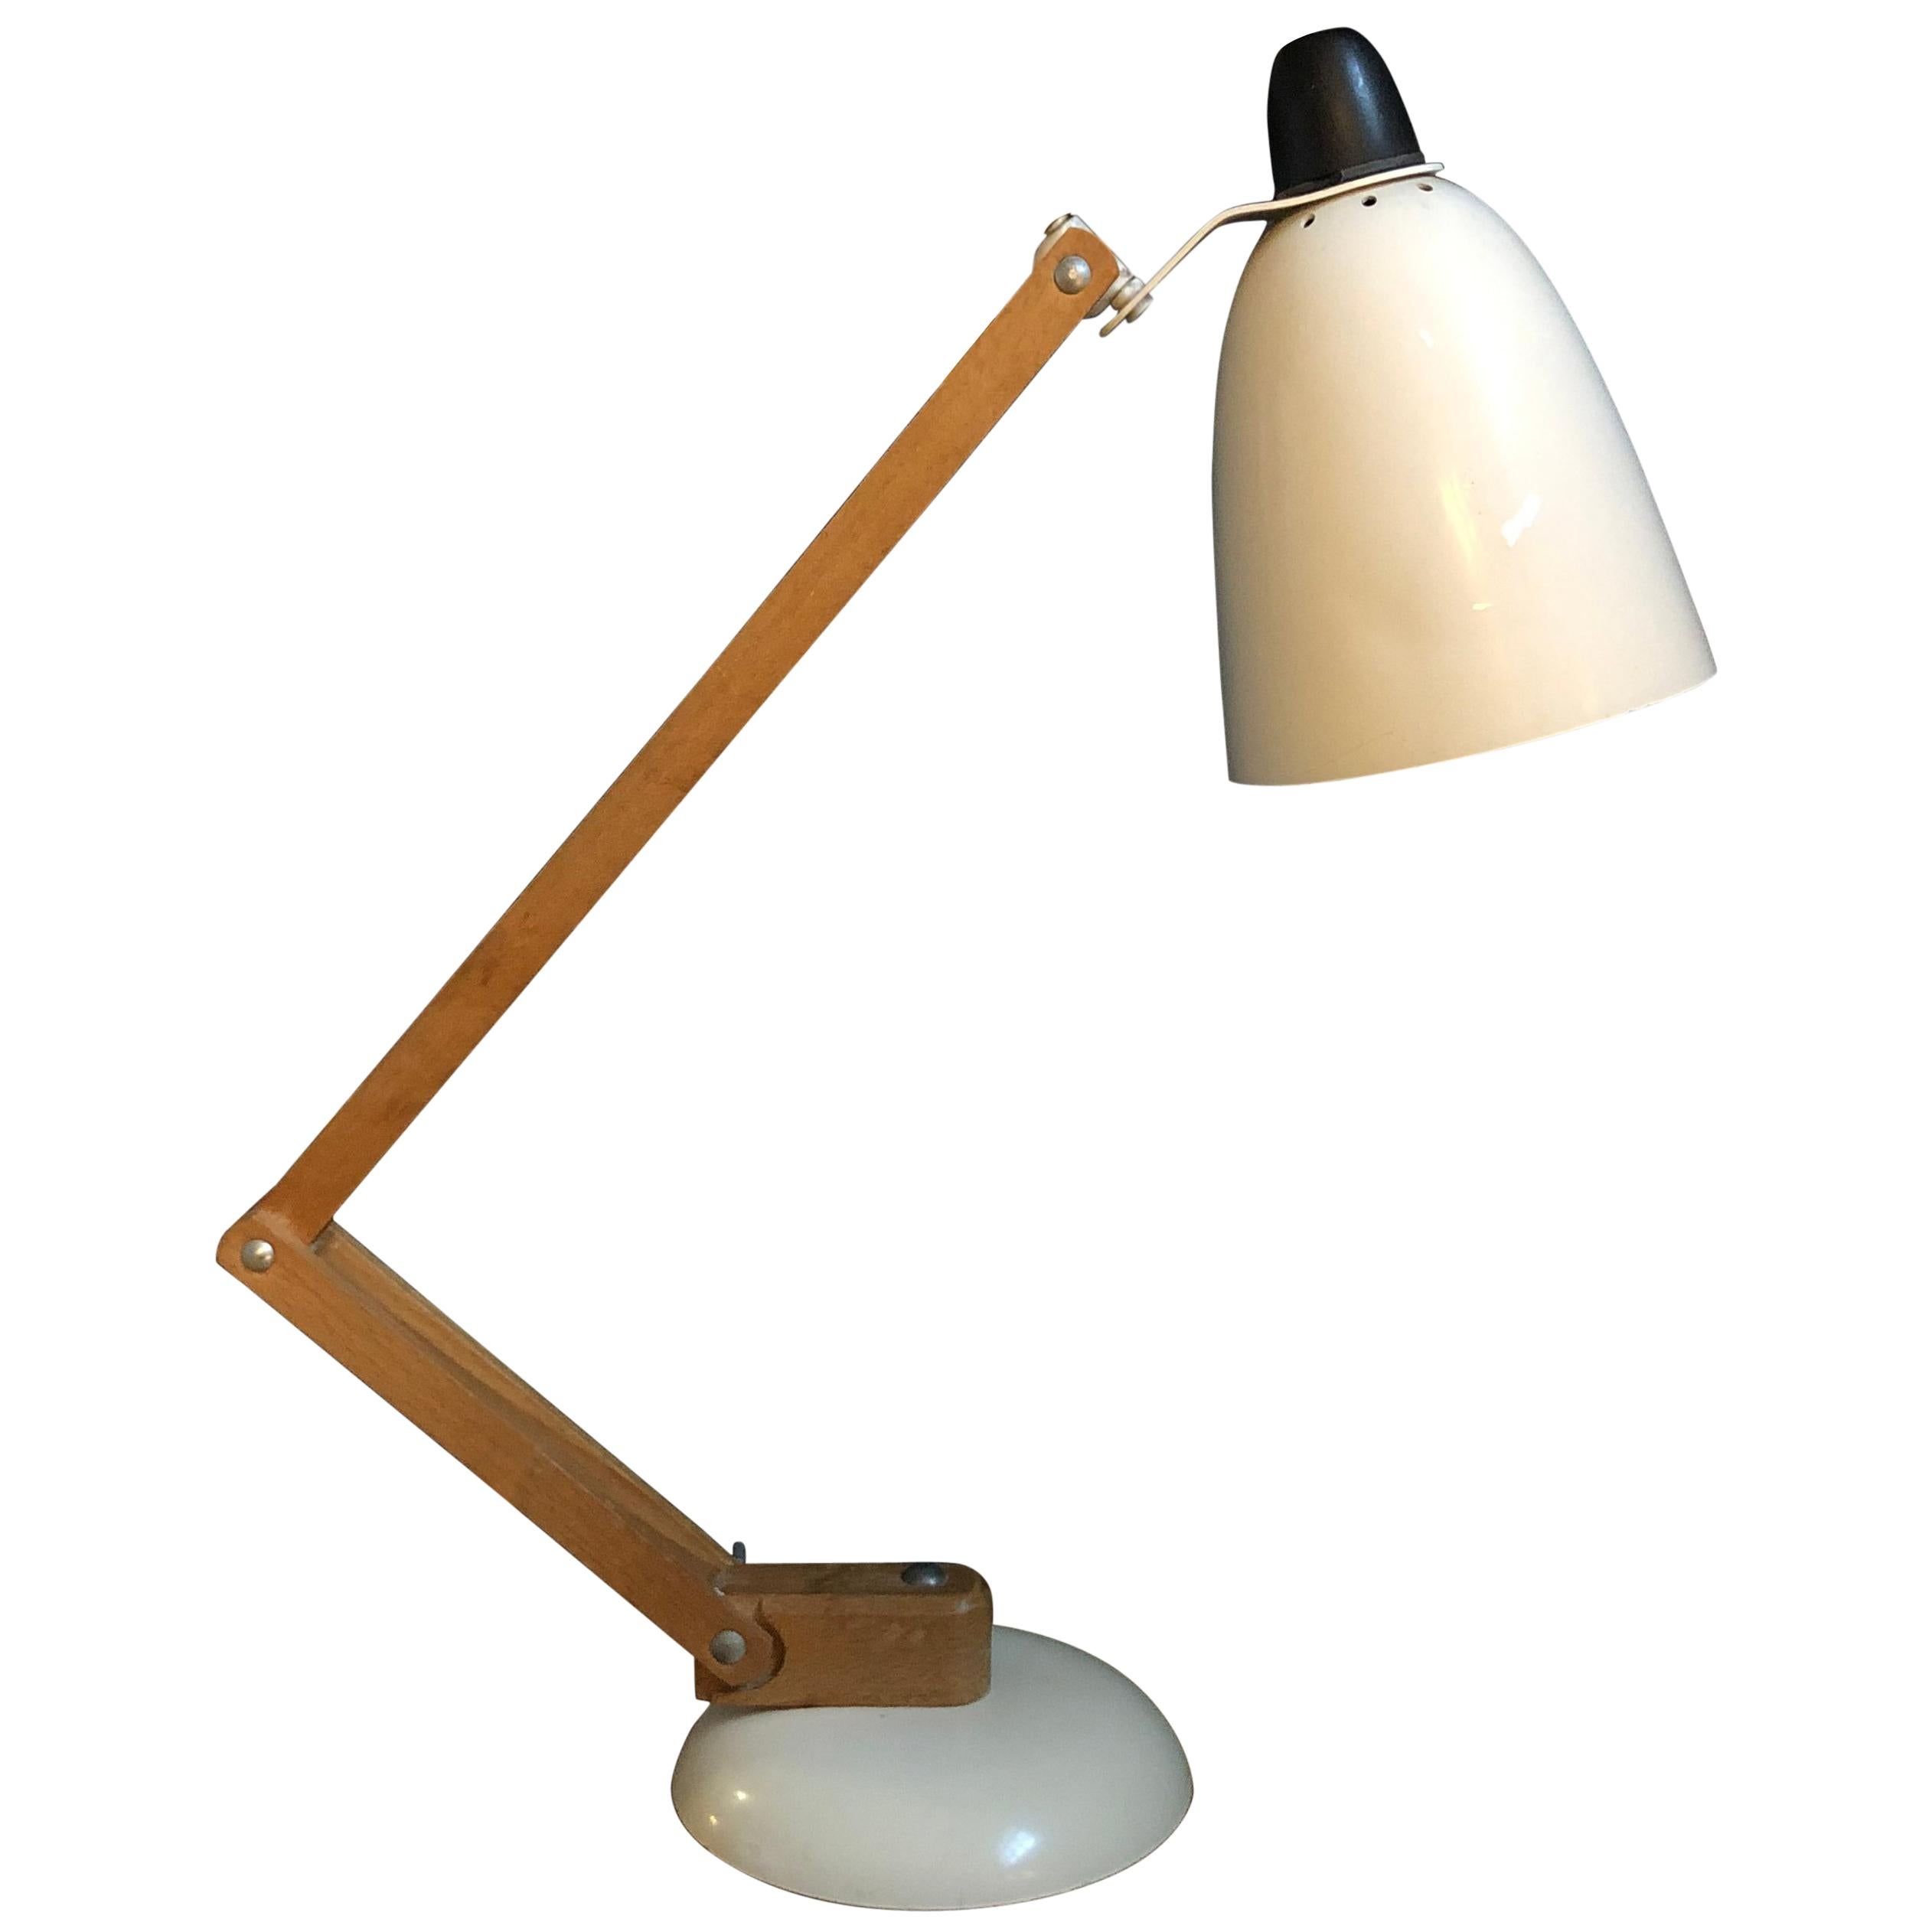 Vintage Midcentury Maclamp by Terence Conran Desk Lamp in White